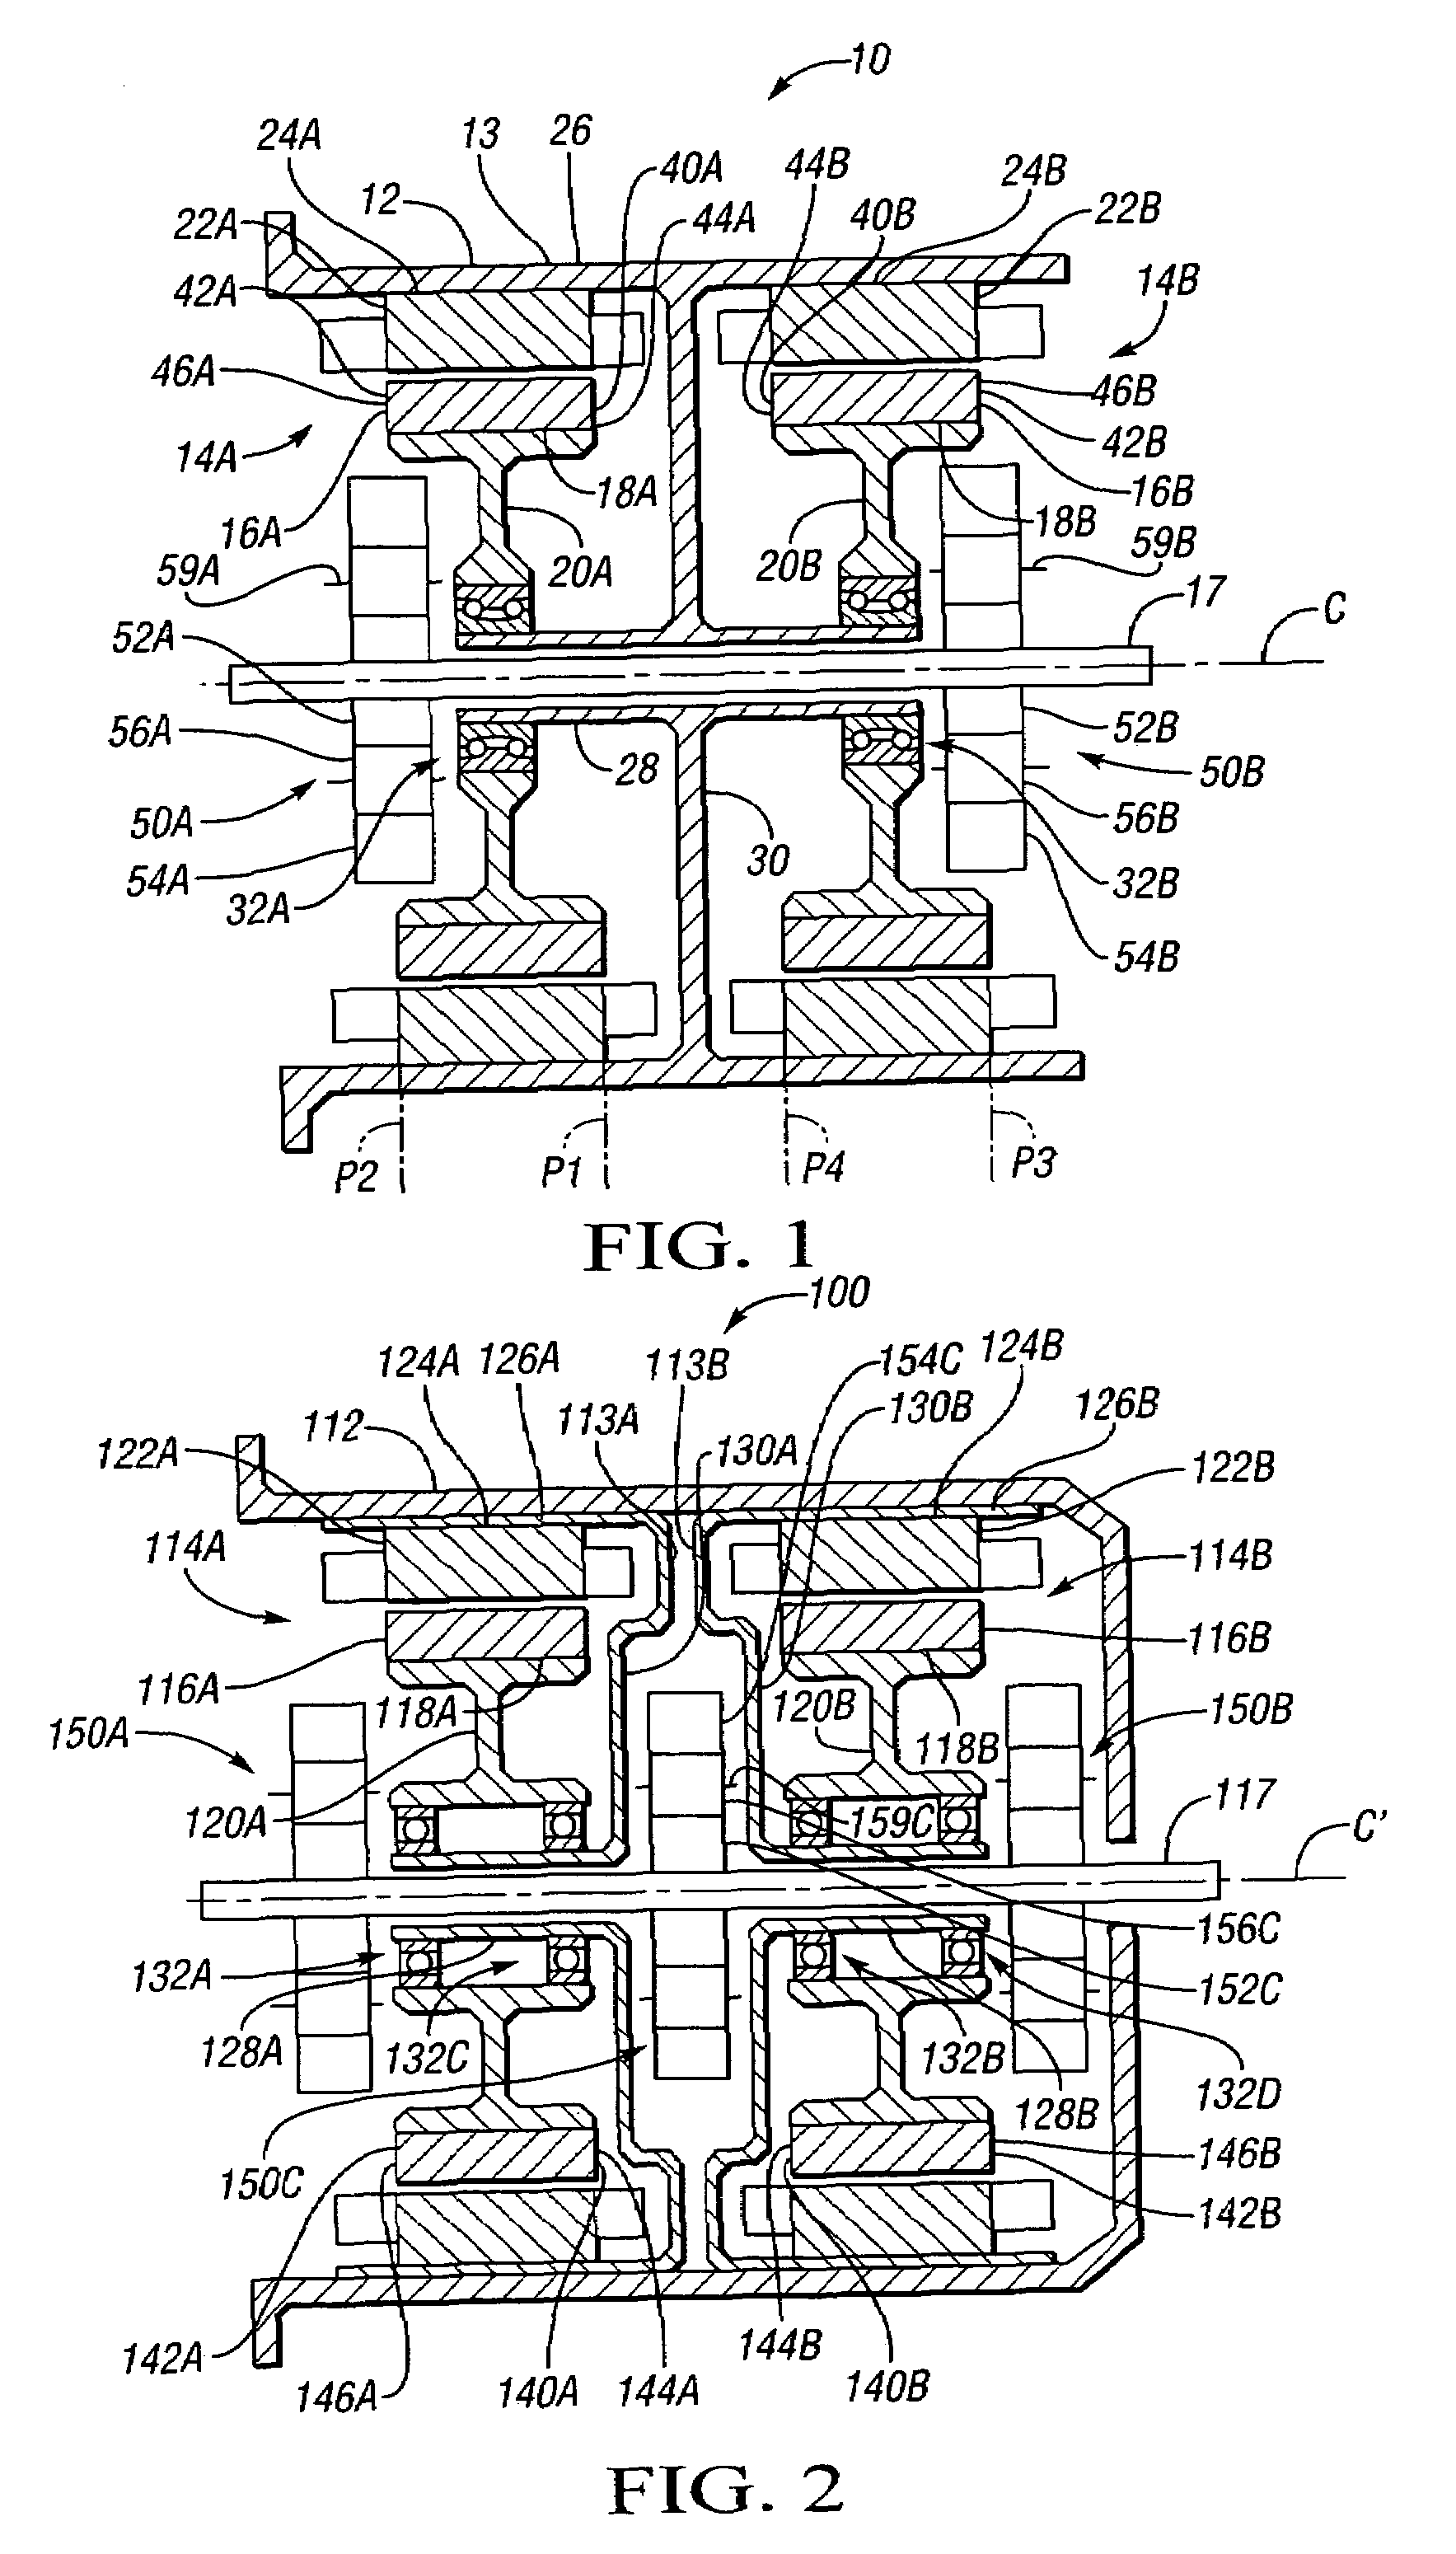 Structural support member for electric motor/generator in electromechanical transmission